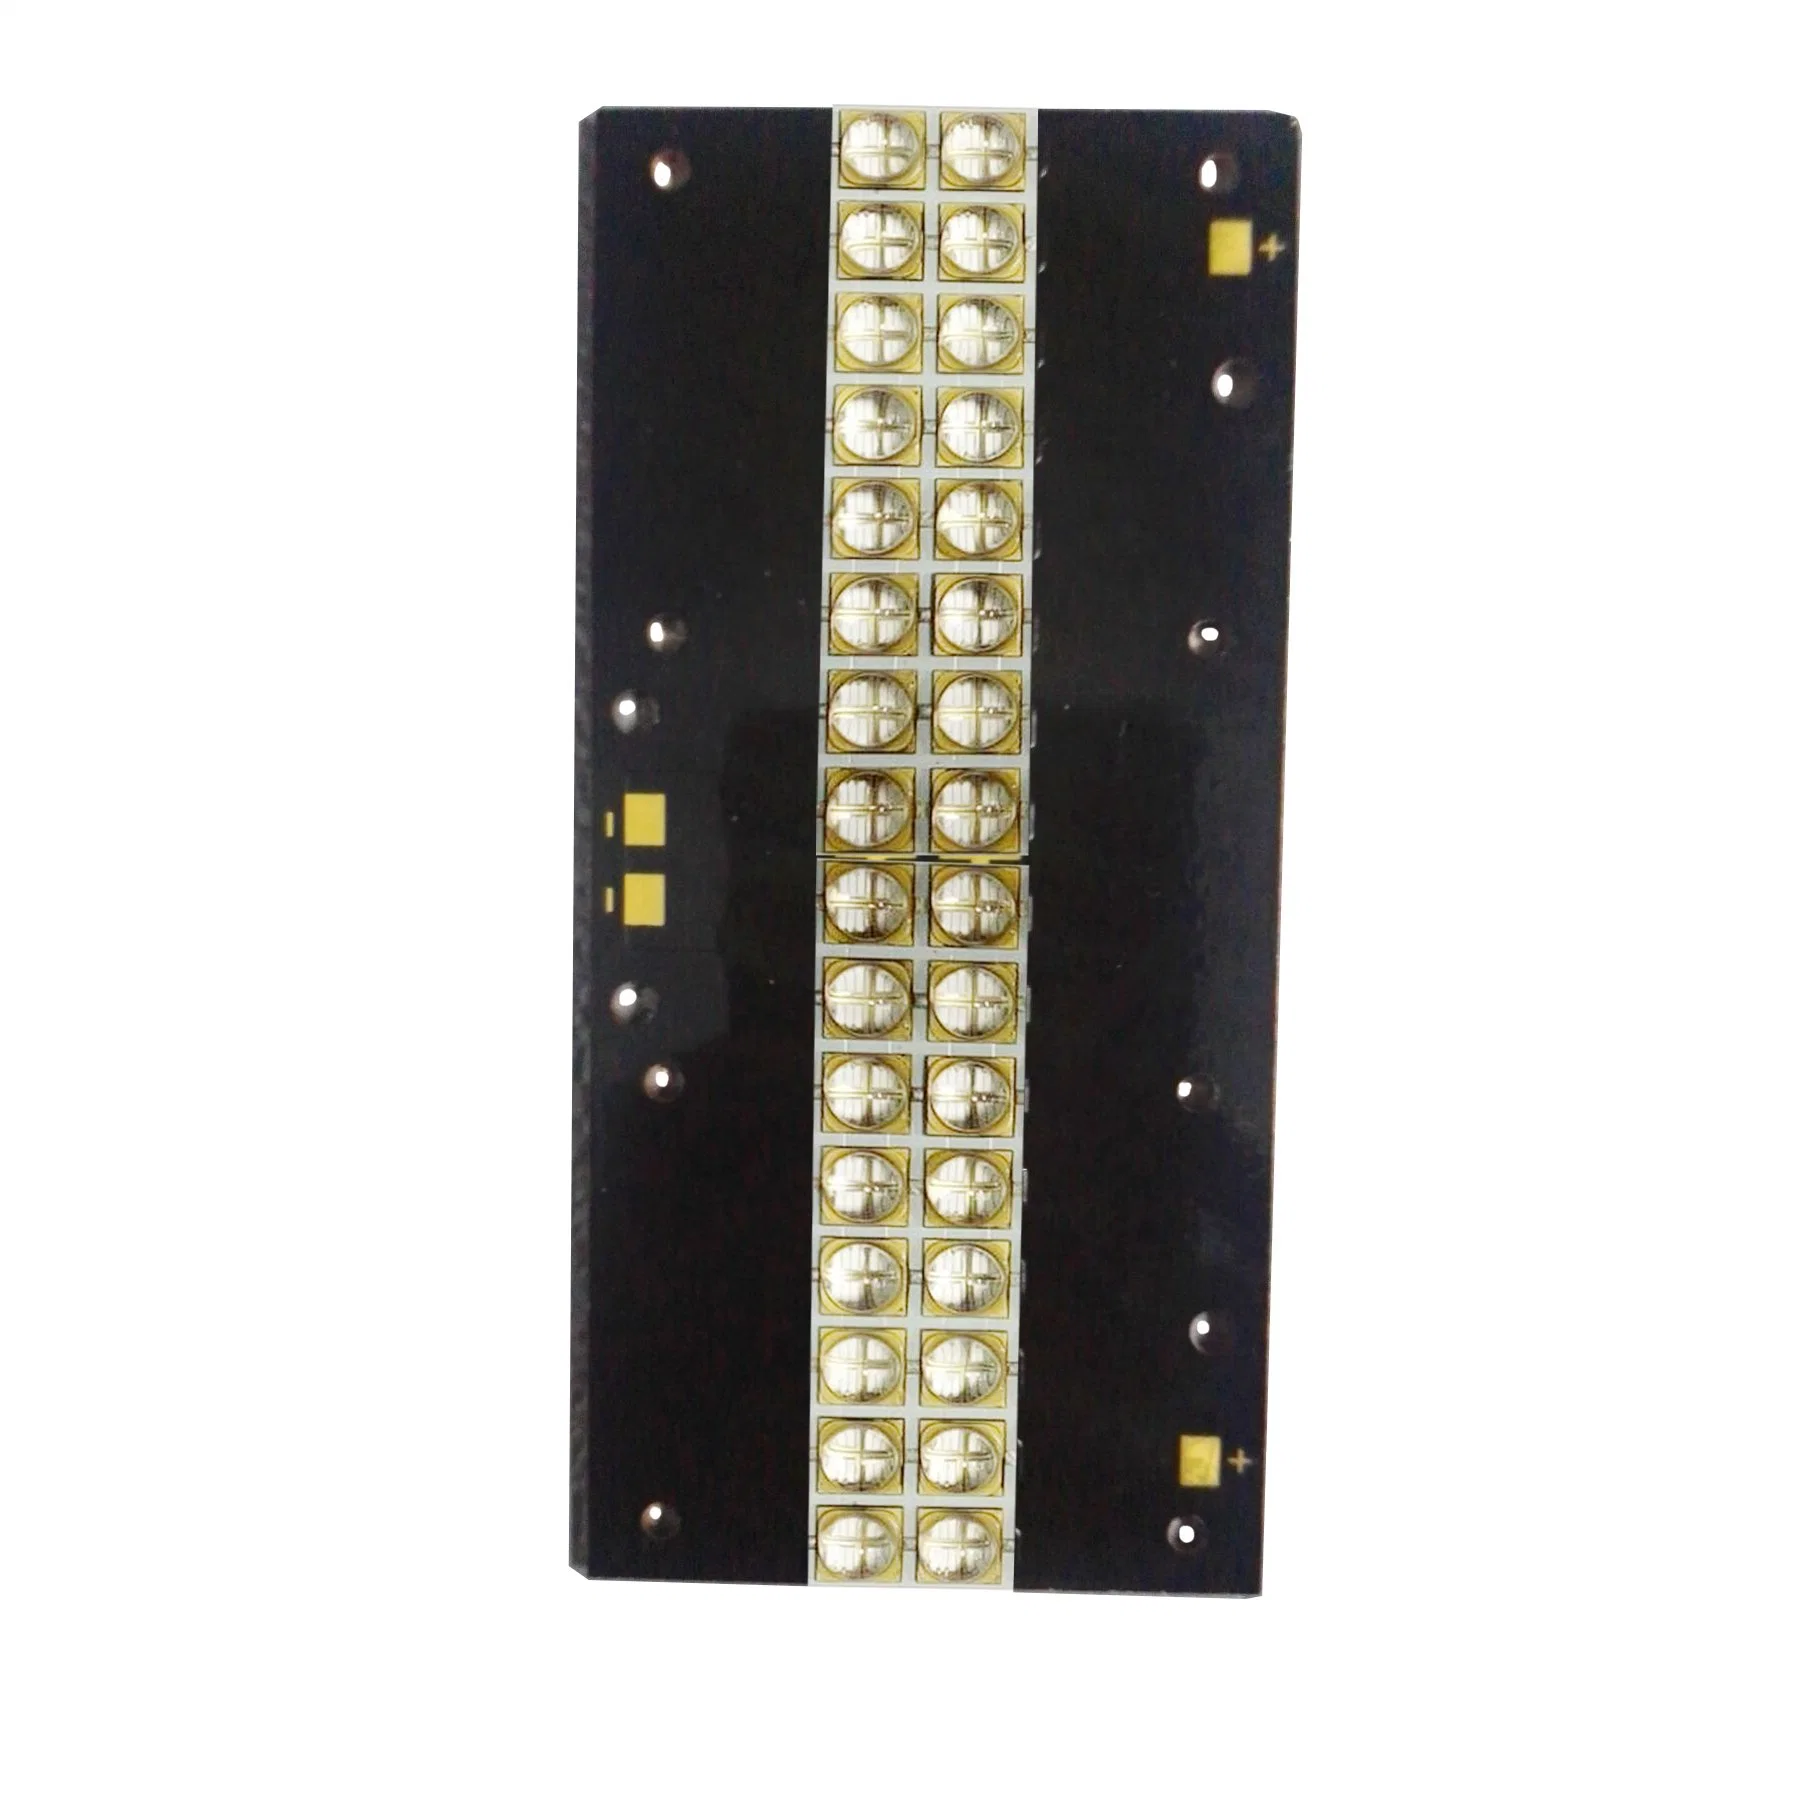 SMD 2835/35355/7070/6868/6565 LED PCB Assembly UV LED Printed Circuit Board for Curing Bulb